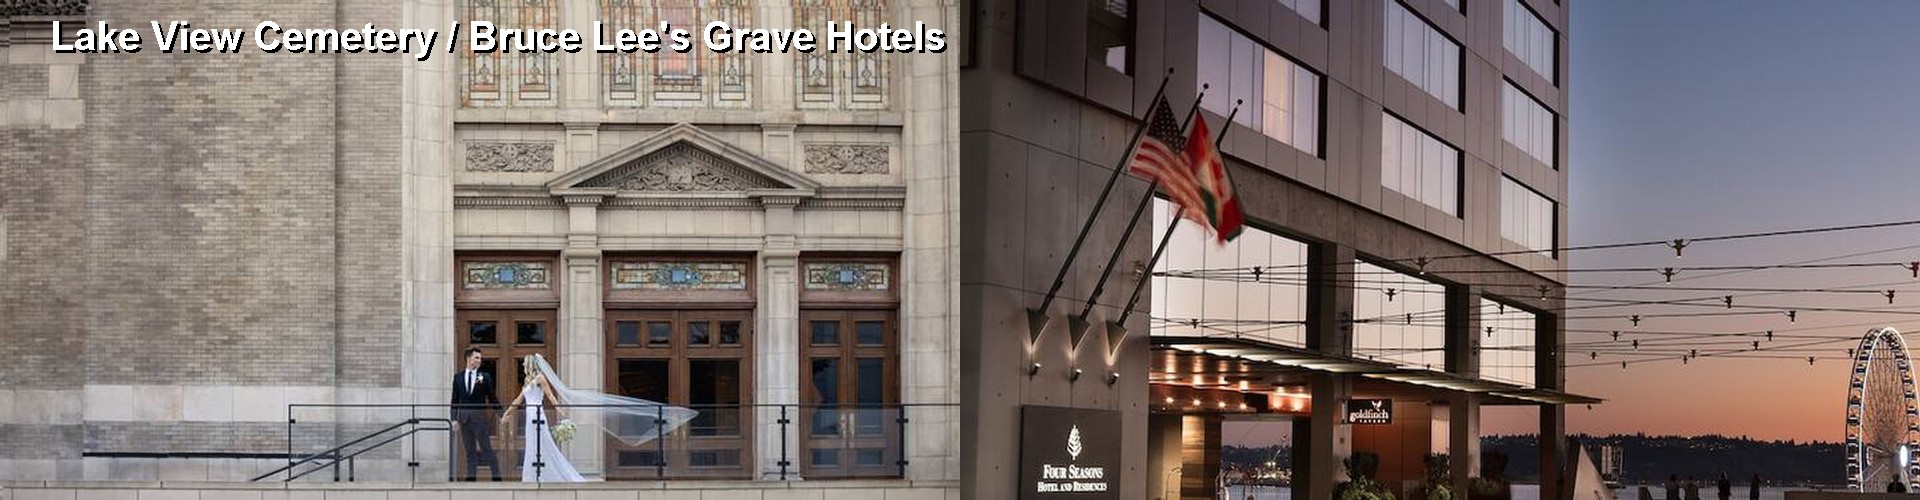 5 Best Hotels near Lake View Cemetery / Bruce Lee's Grave